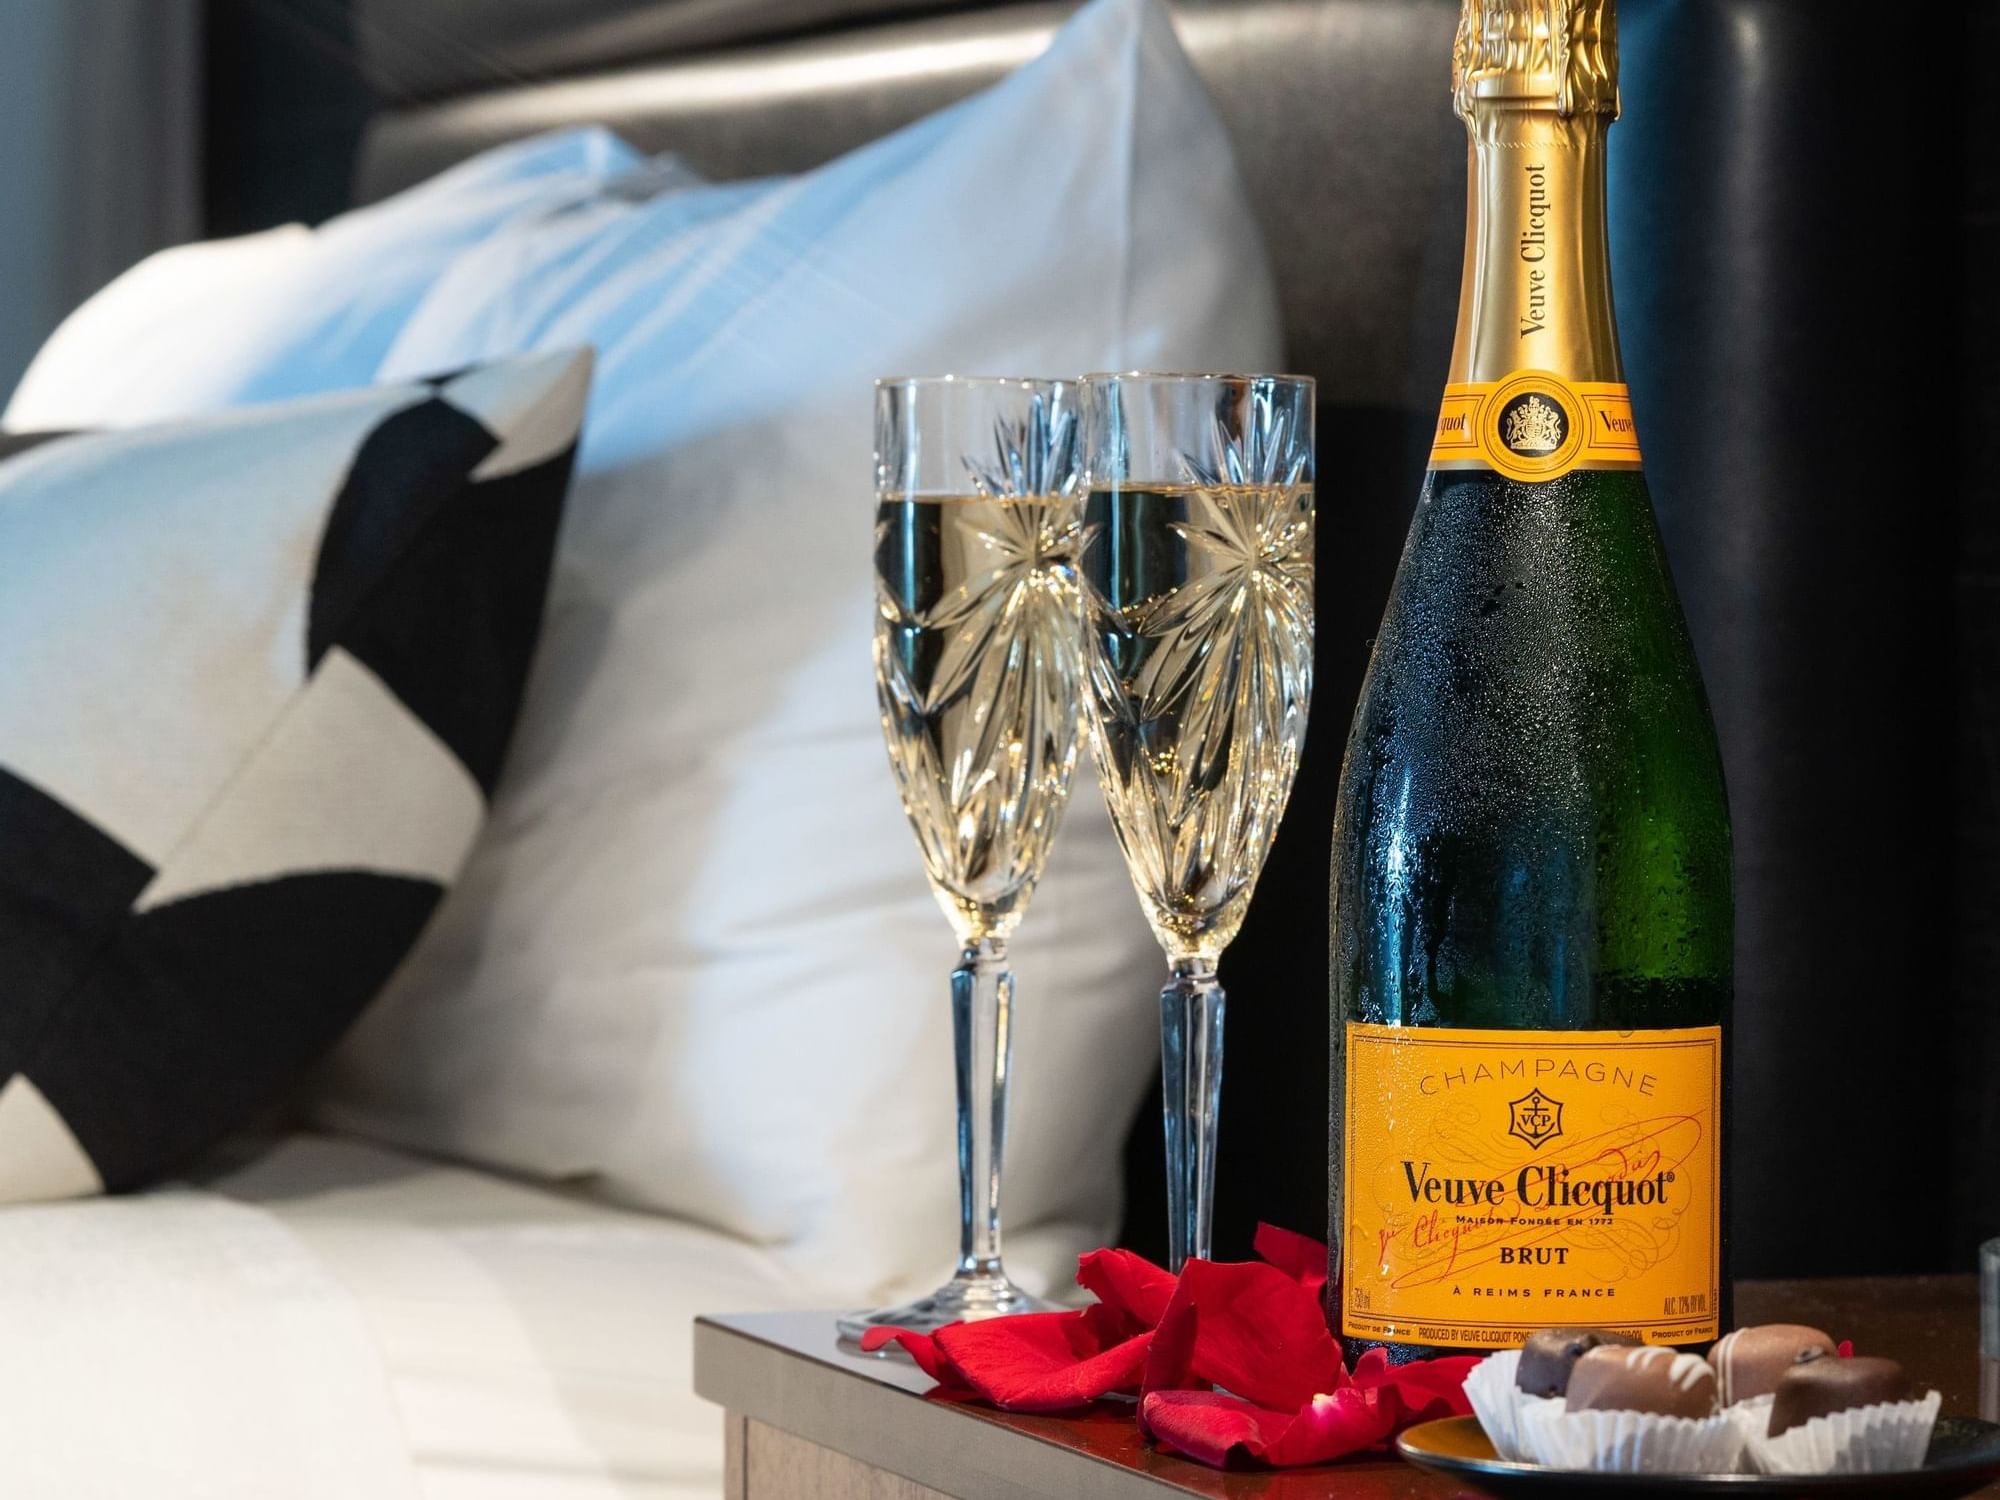 Bottle of Veuve Clicquot and rose petels beside the bed